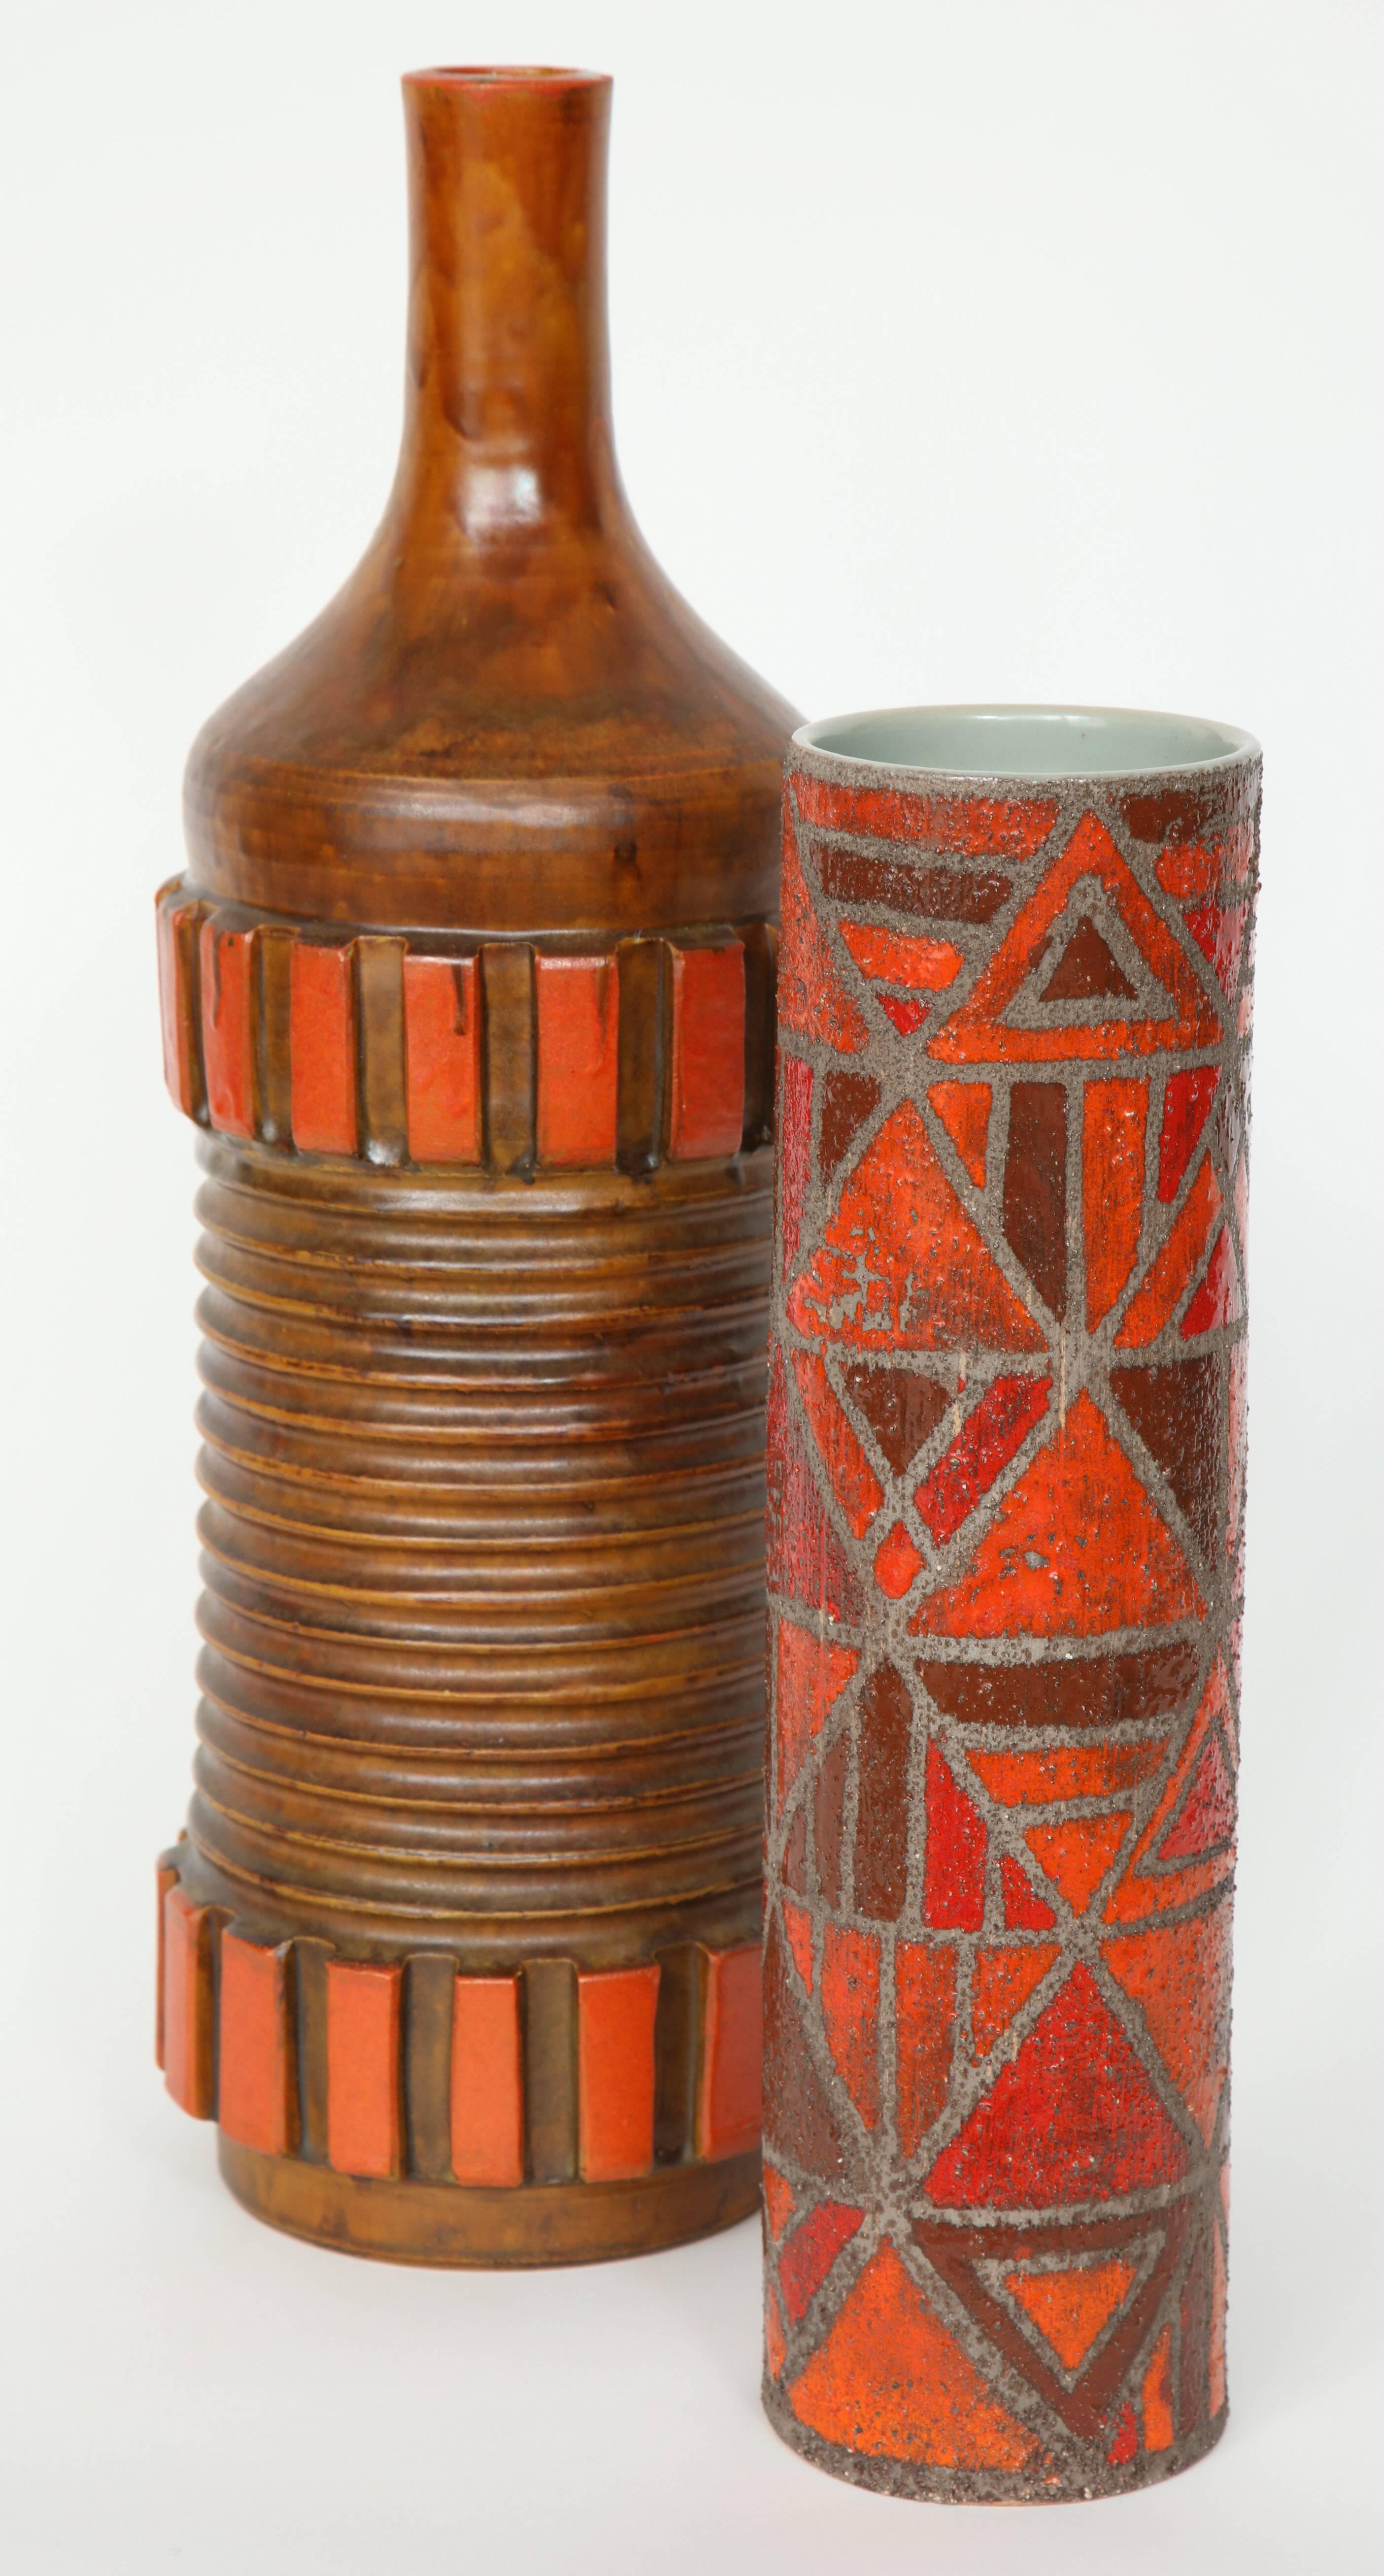 Single Italian ceramic vase in tones of brown and burnt orange, the smaller one featuring a geometric pattern and a sand glaze technique.

Measures: Geometric cylinder shaped measures 13